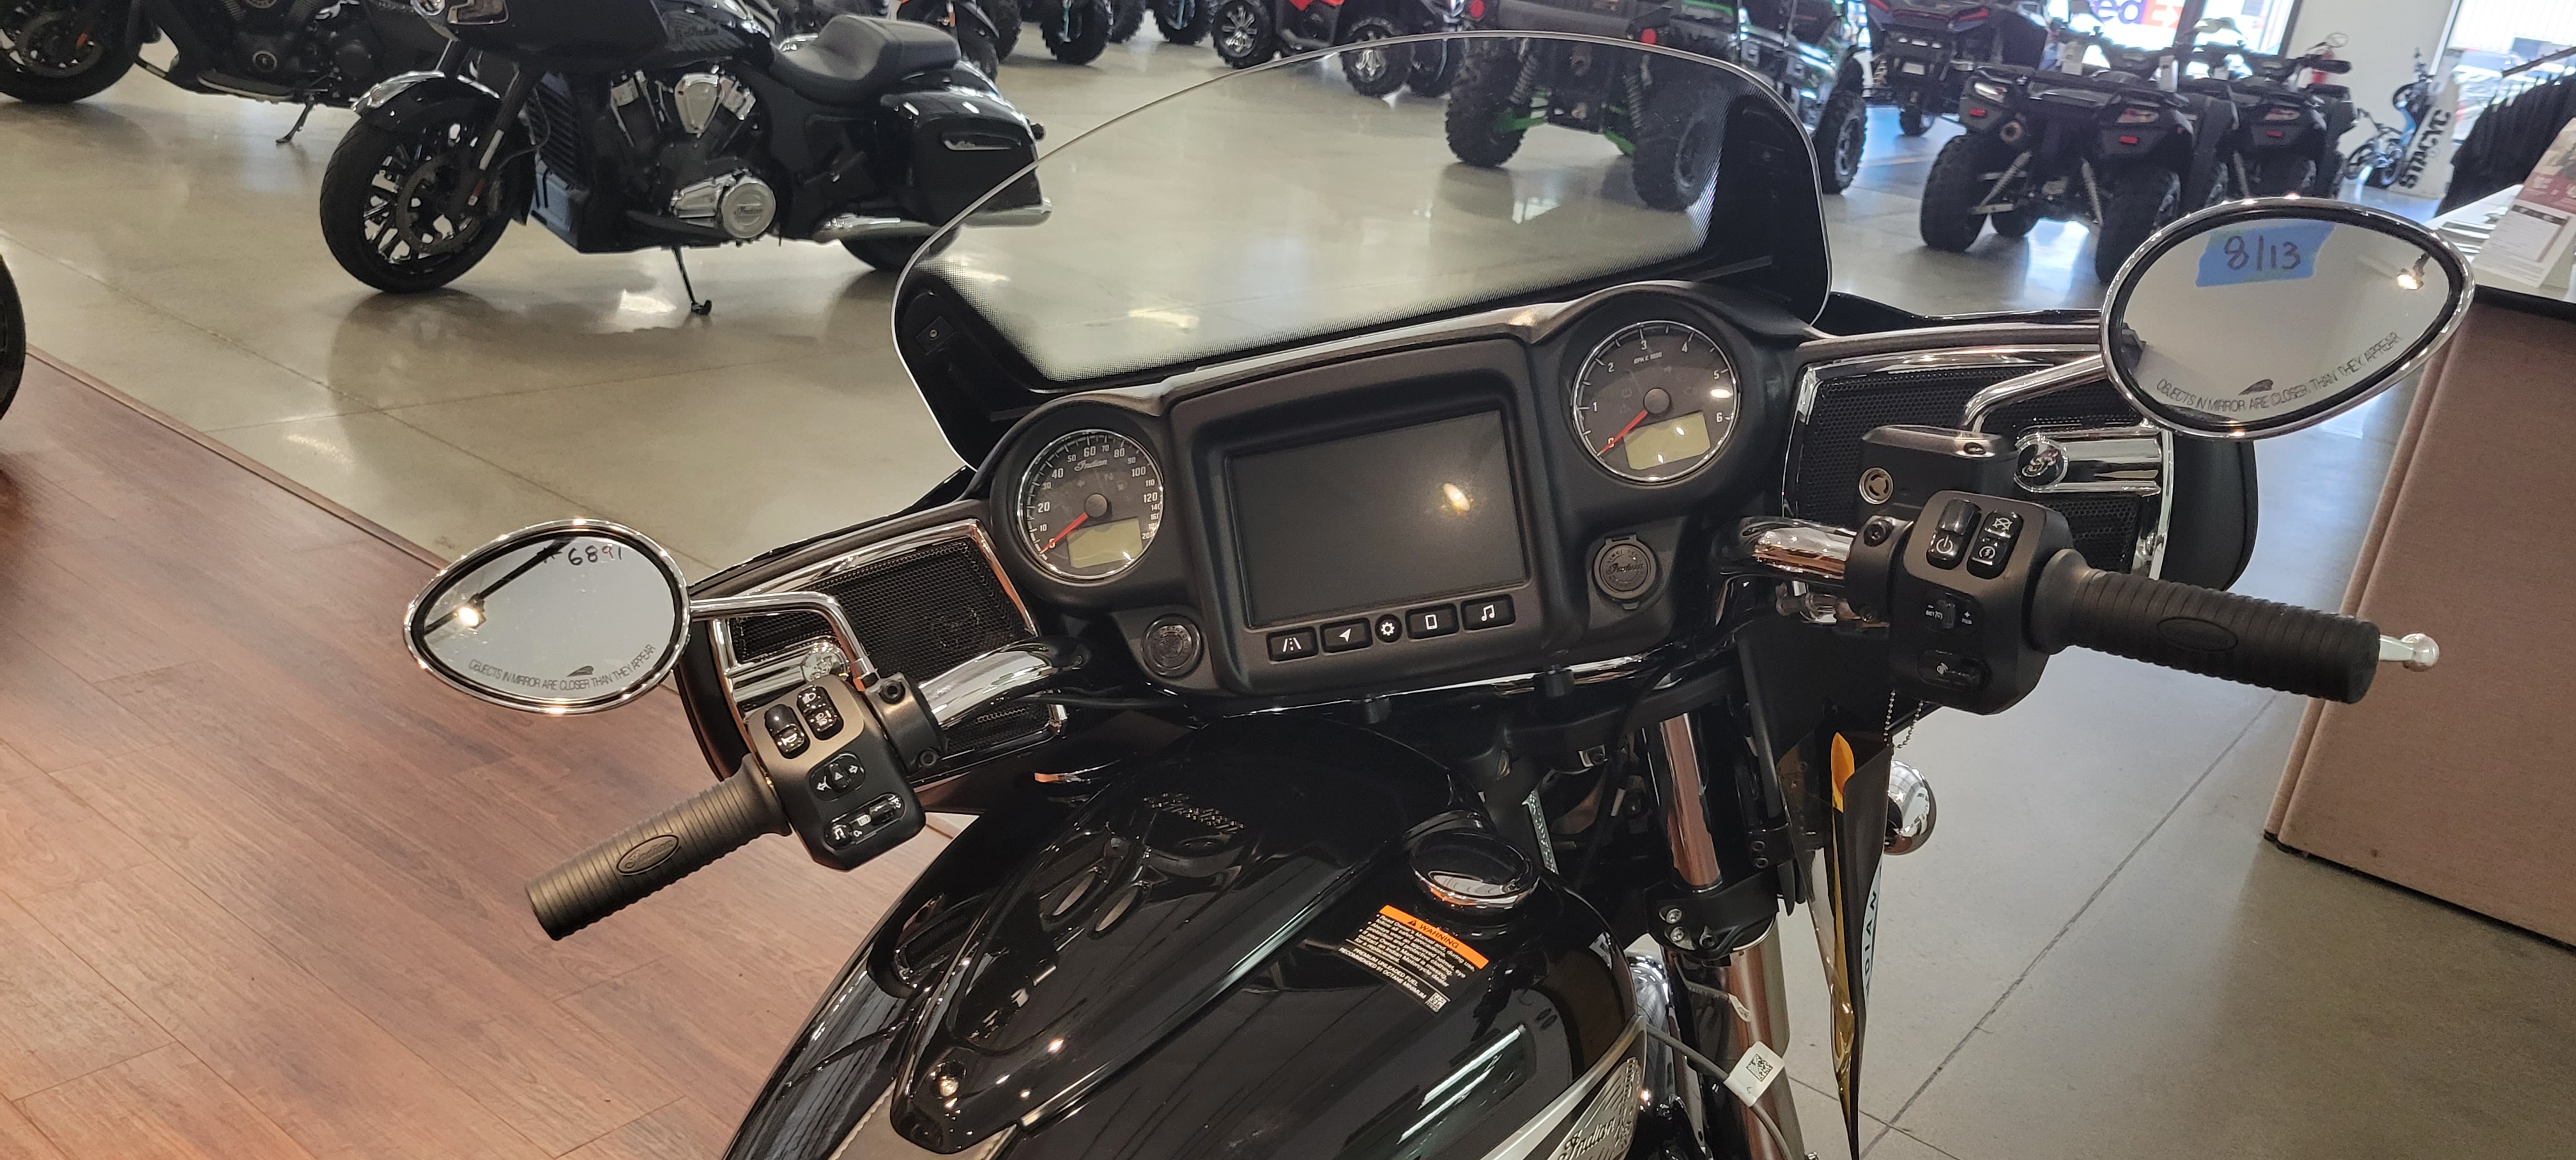 2021 Indian Motorcycle Chieftain at Brenny's Motorcycle Clinic, Bettendorf, IA 52722